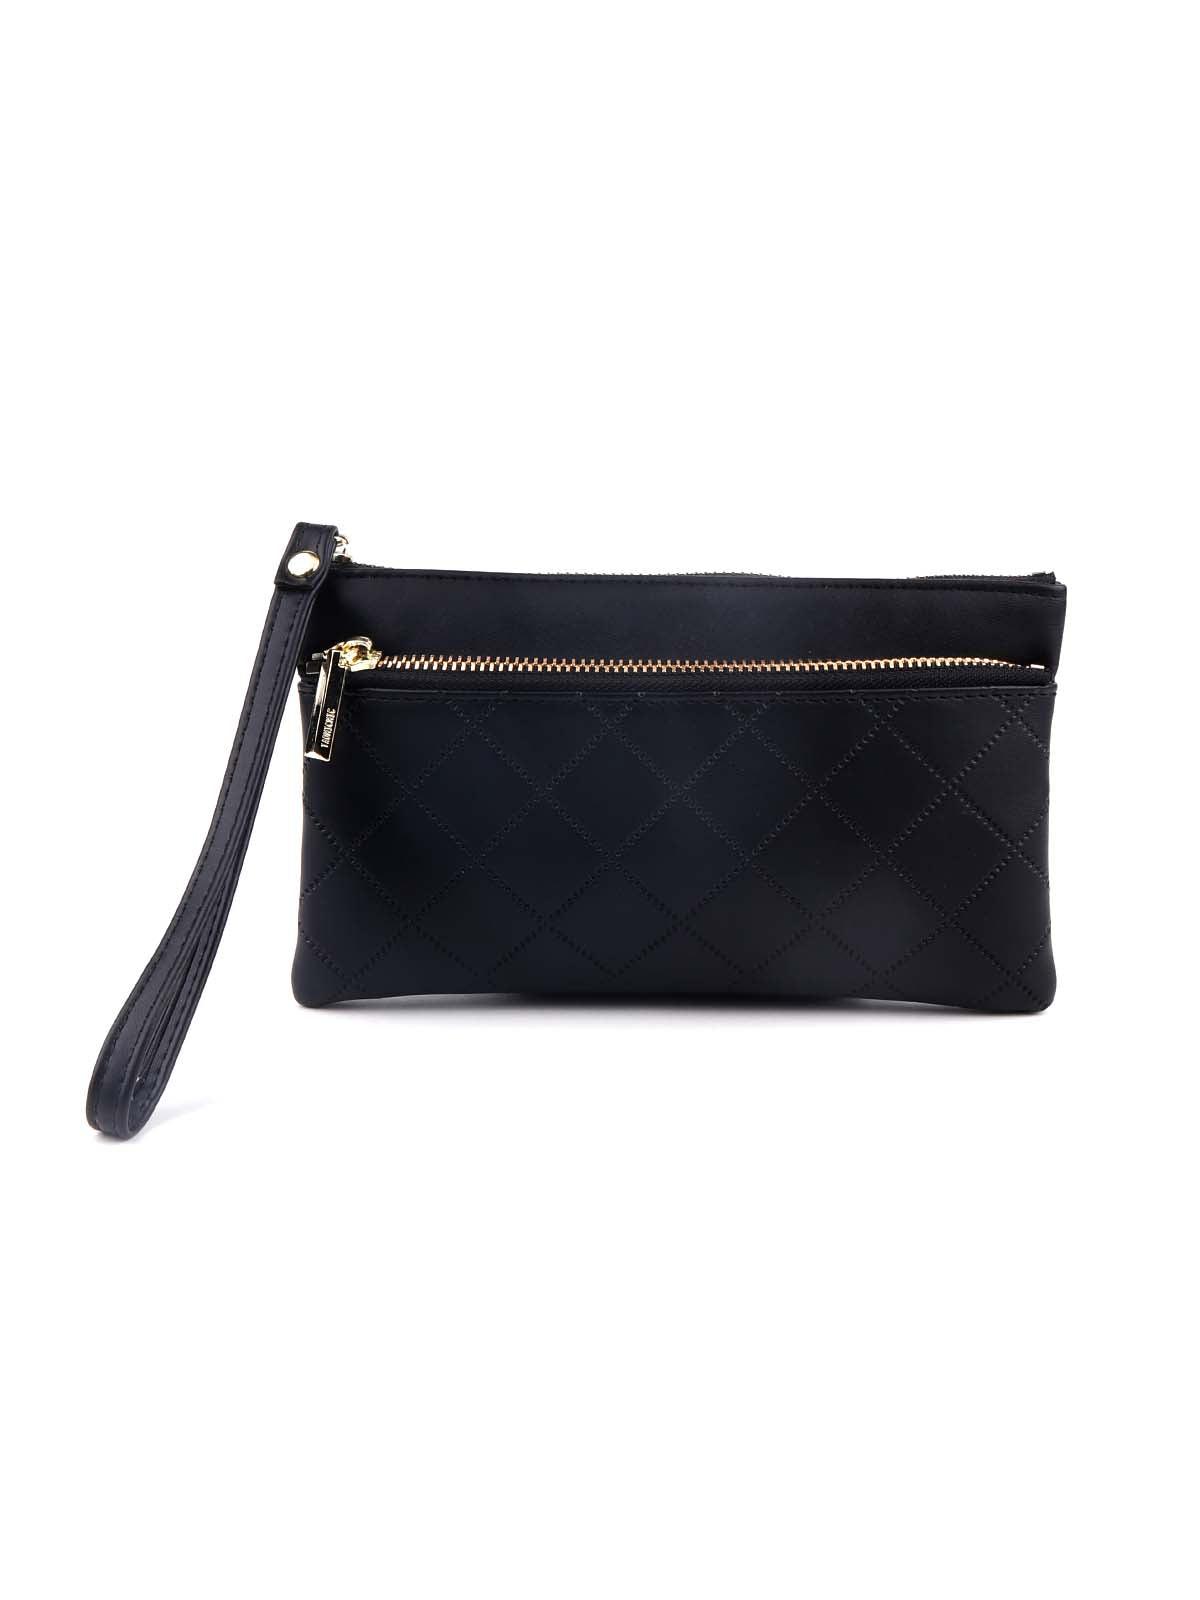 Mulberry Plaque Small Zip Coin Pouch | Black Small Classic Grain | Women |  Mulberry